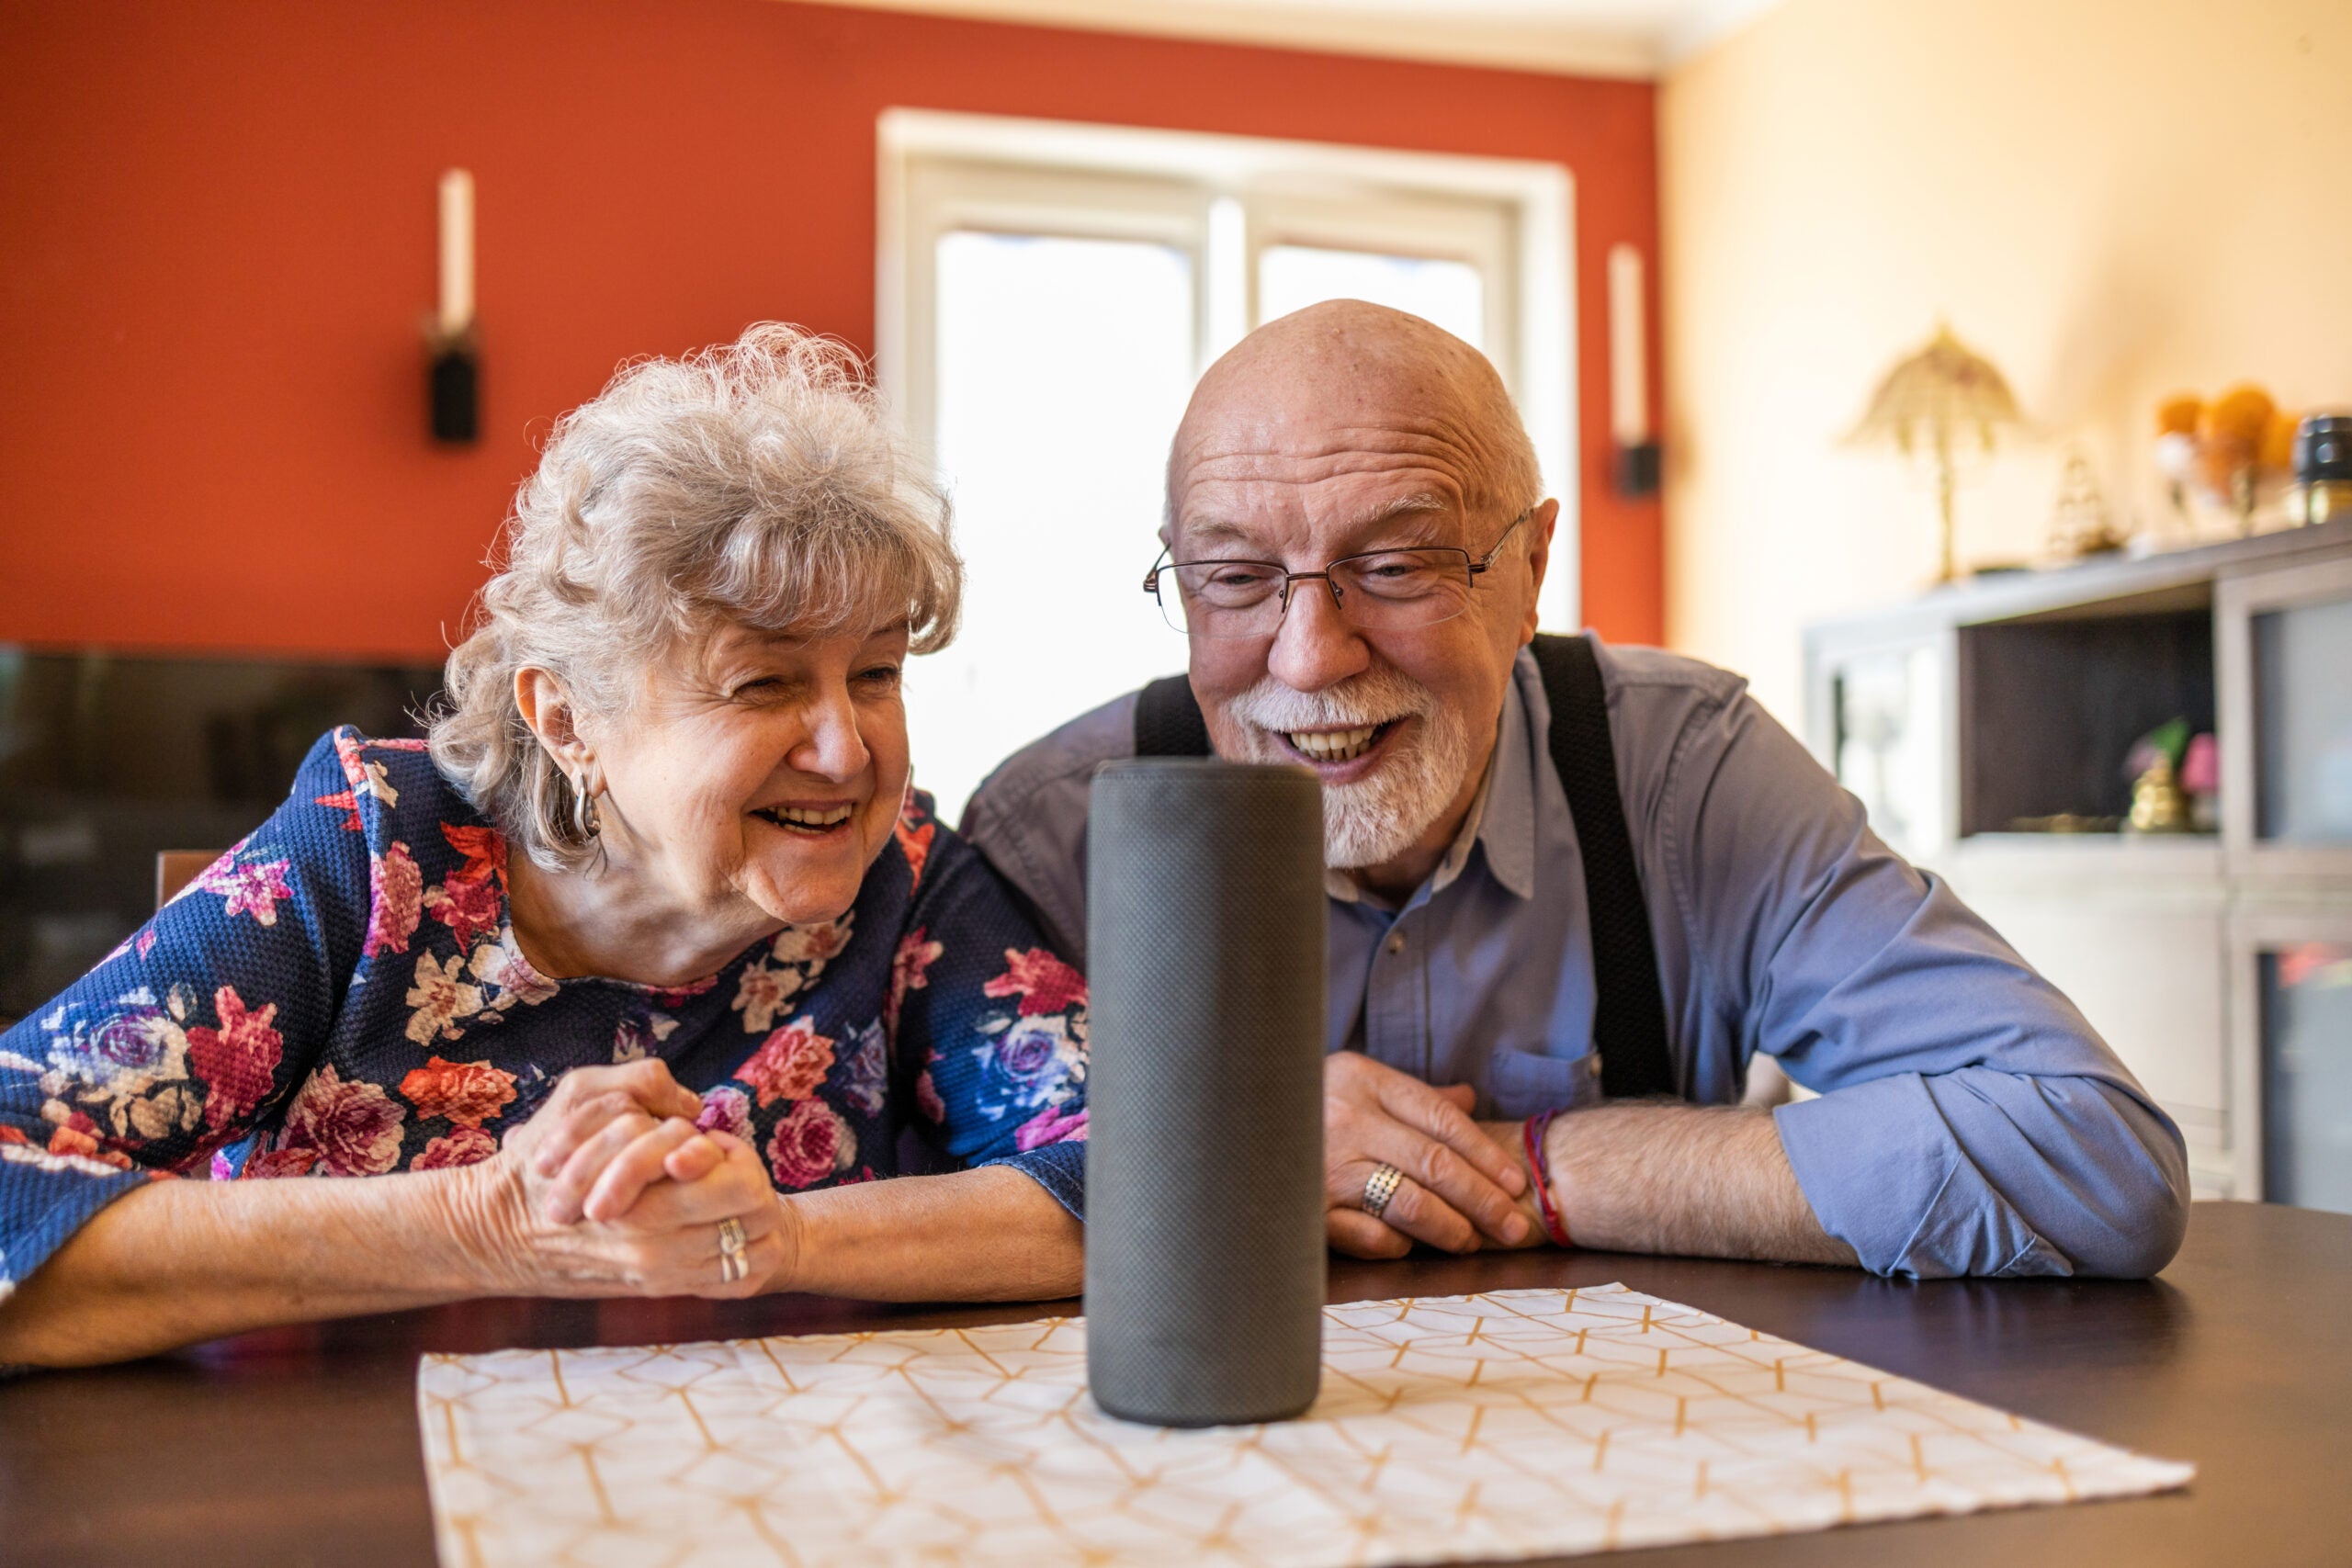 Elderly hetero couple excitedly use a voice-enabled virtual assistant speaker at home.